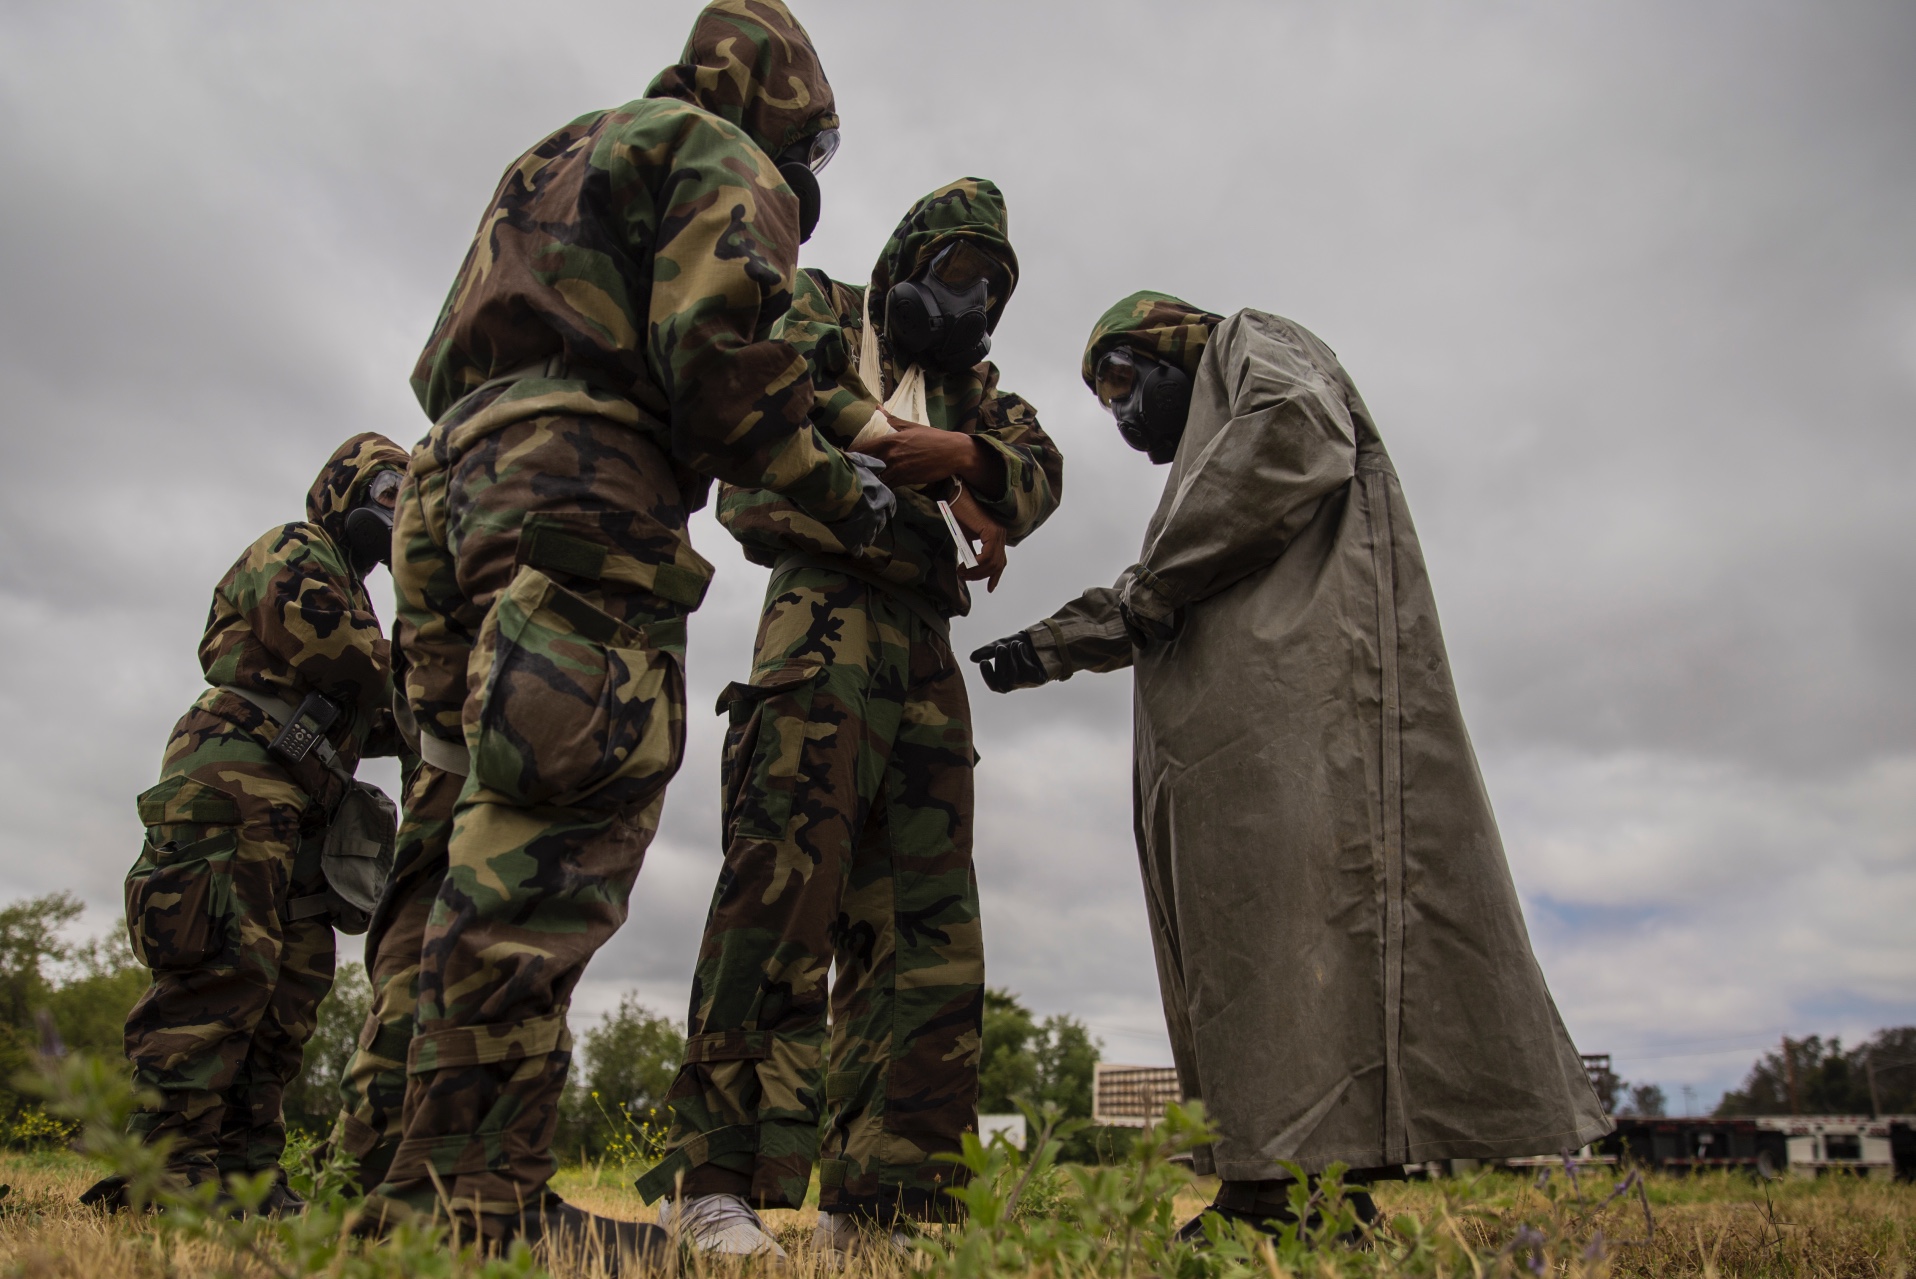 U.S. Marines and Sailors with Charlie Company, 1st Medical Battalion, 1st Marine Logistics Group, assess a simulated casualty during a Reconnaissance Surveillance and Decontamination course at Camp Pendleton, Calif